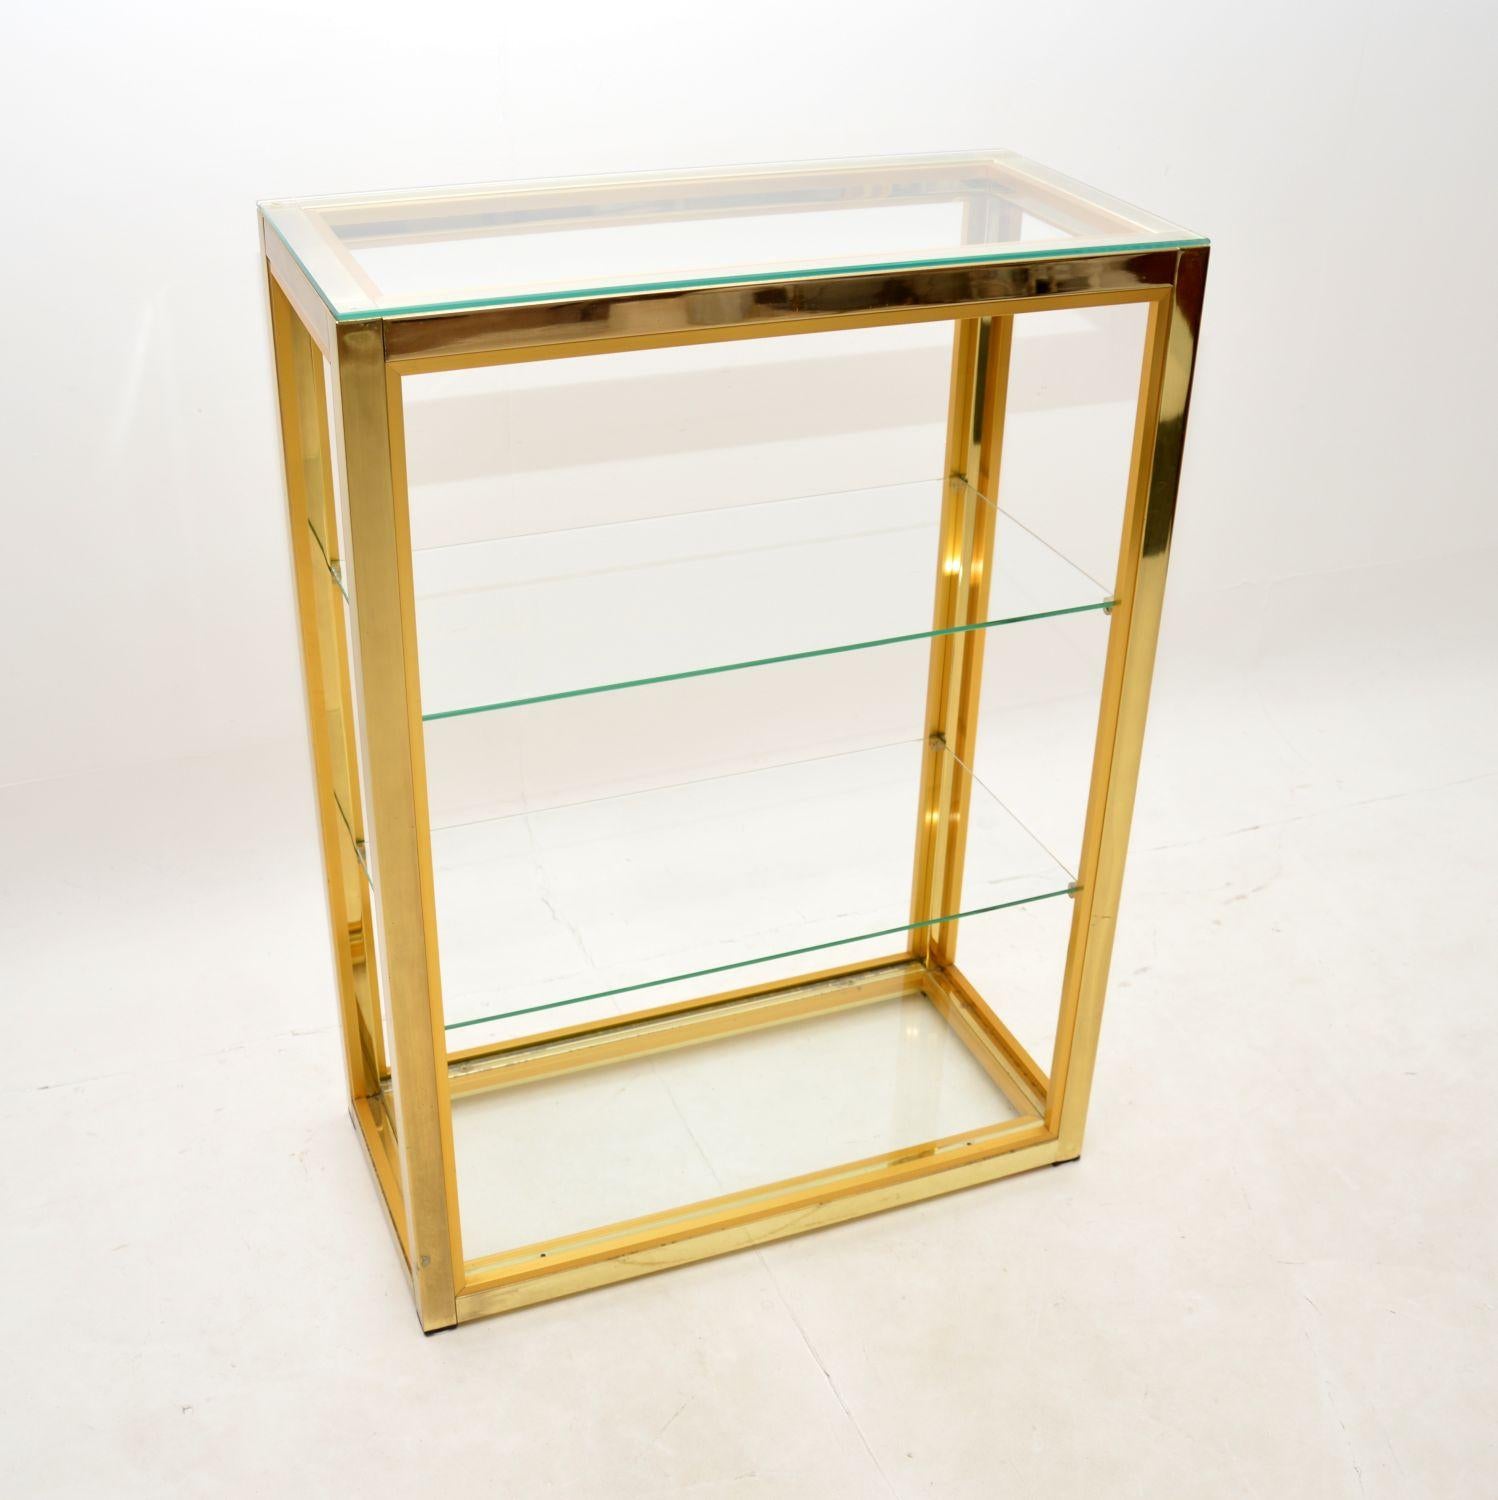 A stunning vintage Italian etagere display cabinet by Zevi. This was designed by Renato Zevi, it was made in Italy in the 1970’s.

This is the less commonly seen version in completely gold finish, it is brass plated aluminium. The quality is